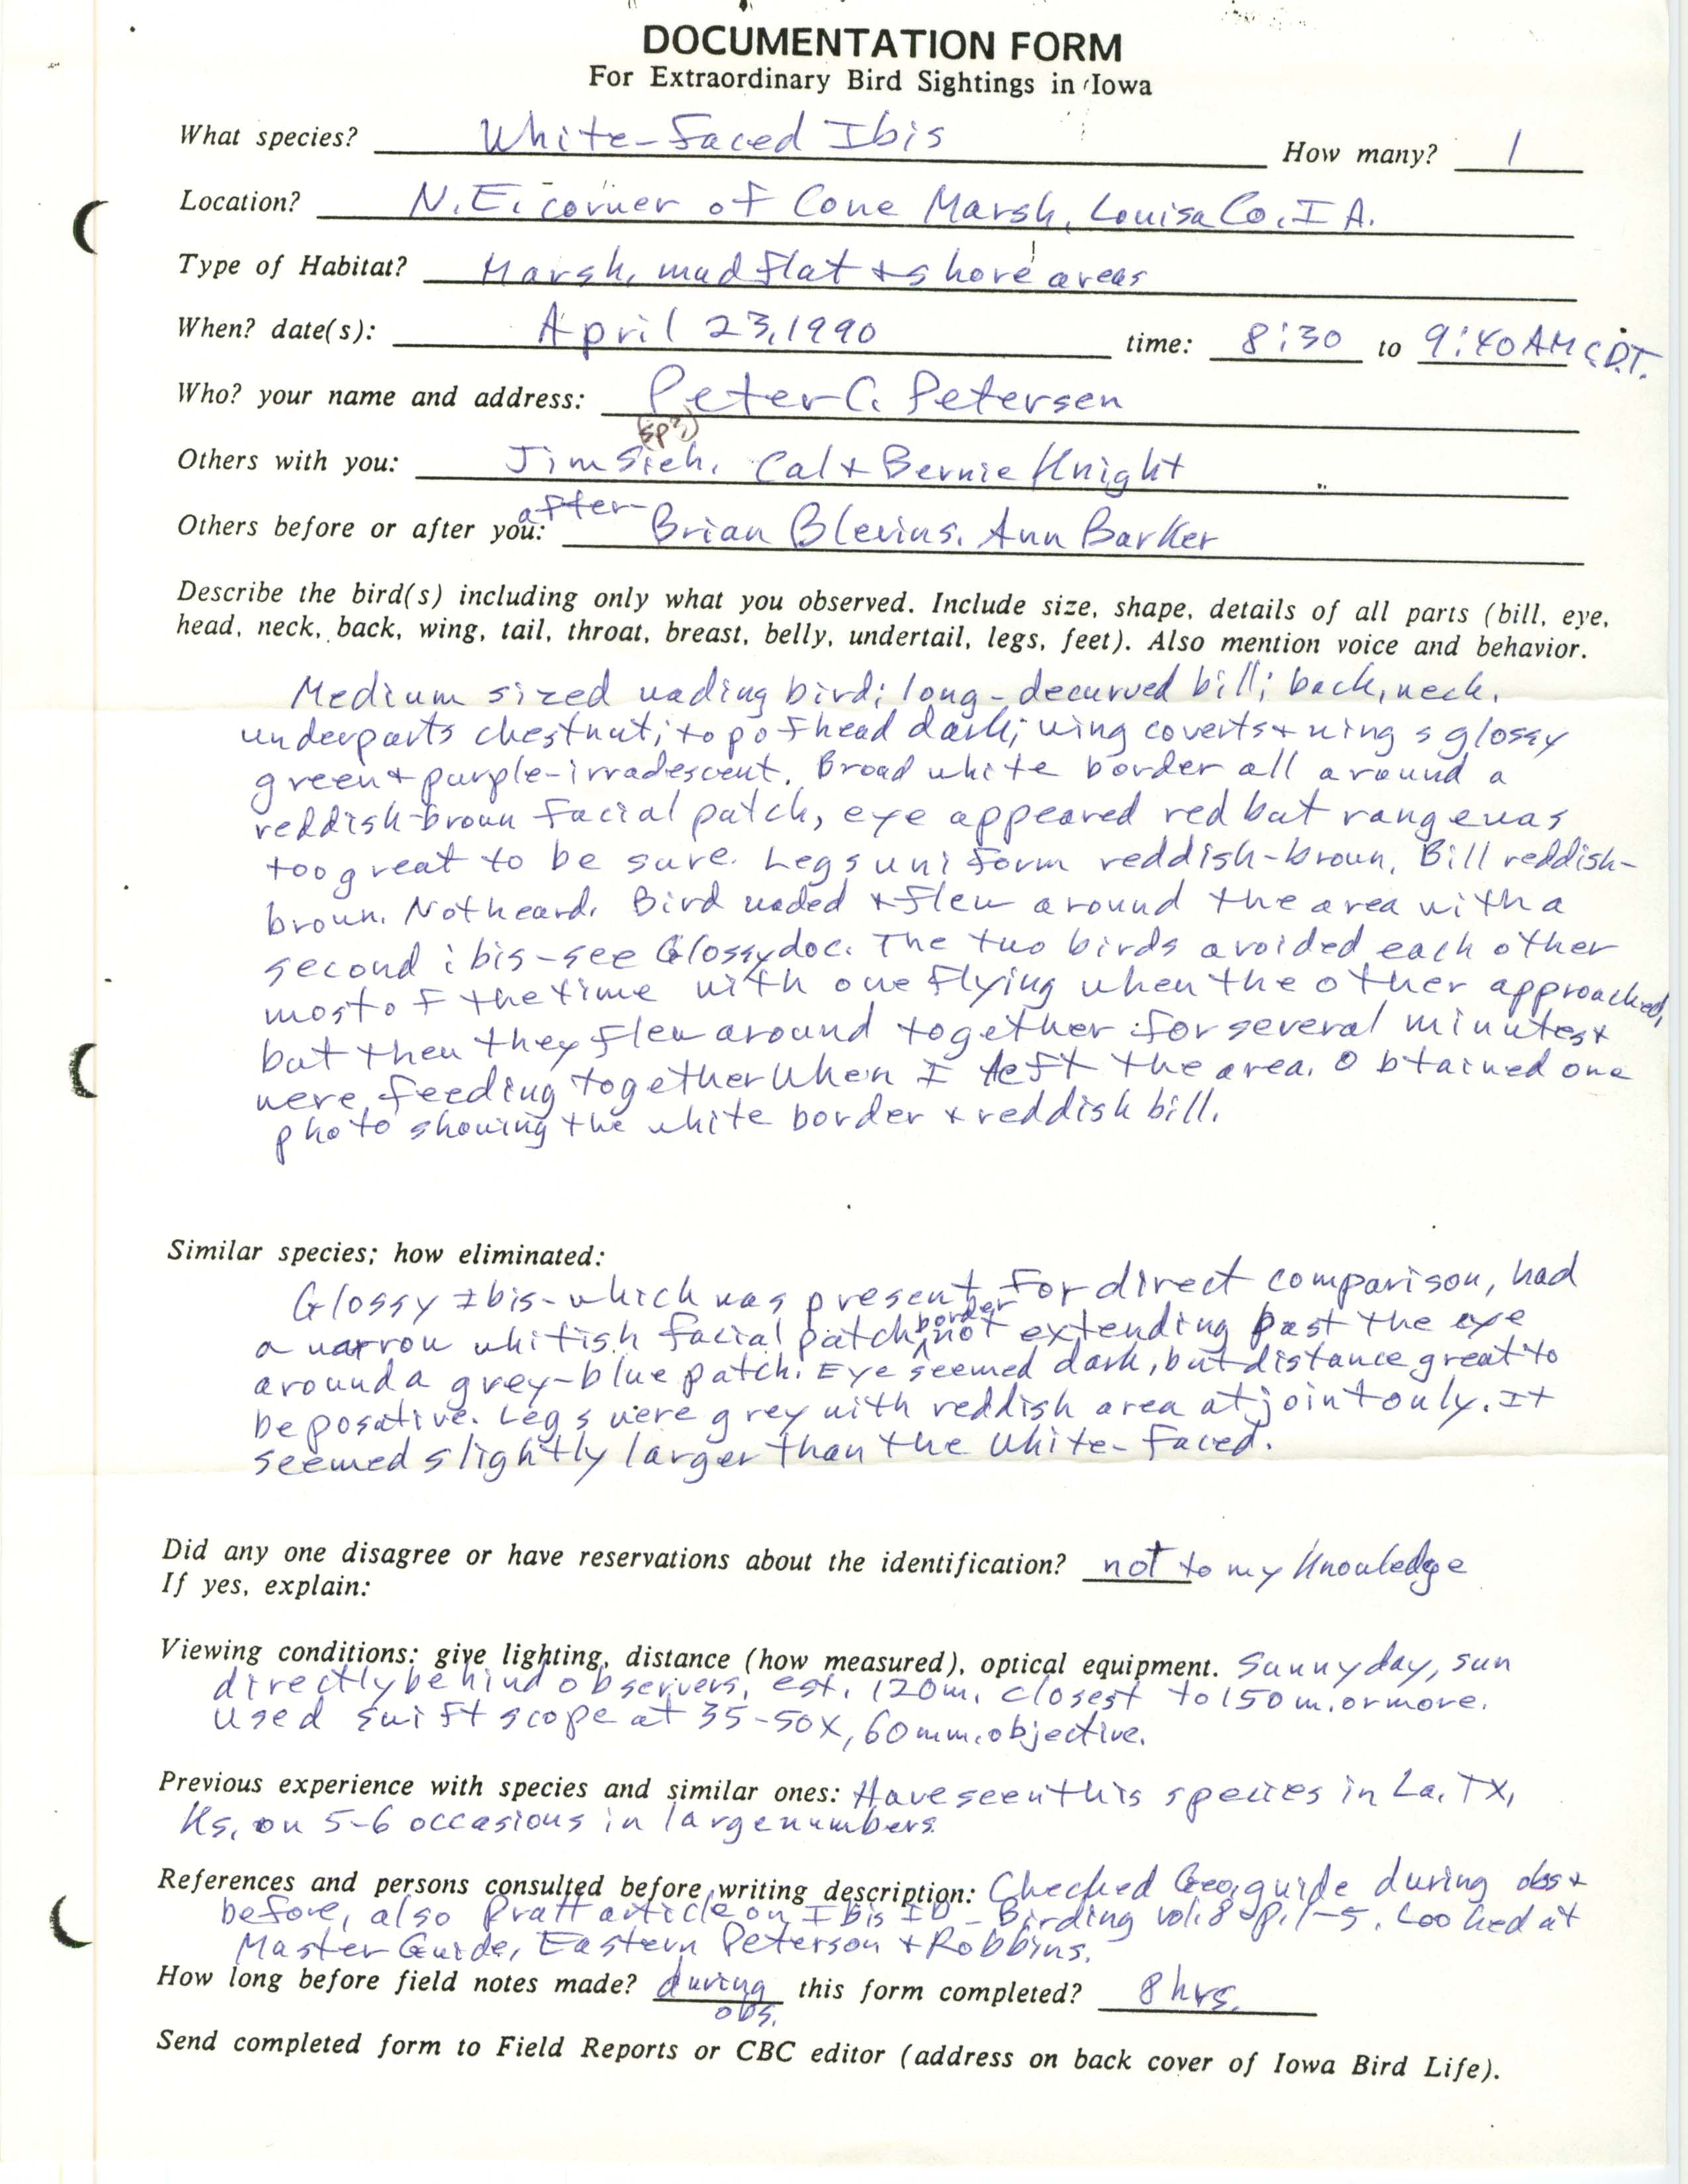 Rare bird documentation form for White-faced Ibis at Cone Marsh, 1990